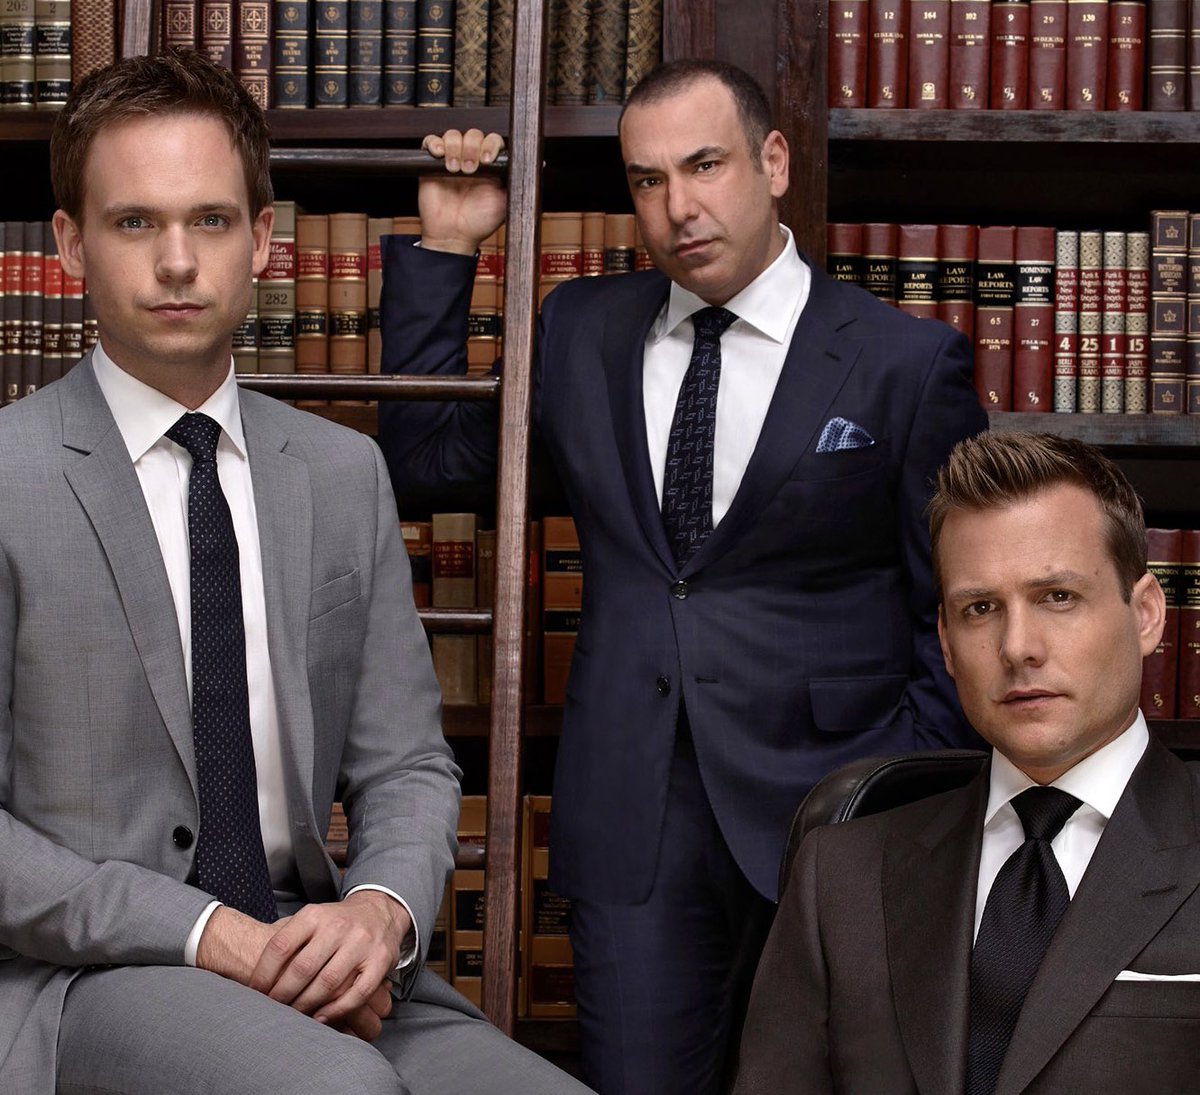 The new ‘SUITS’ series will be set in an entertainment law firm in L.A. Main character will be a young female Harvard law alum who aspires to be made Head of Entertainment. (Source: puck.news/newsletter_con…)